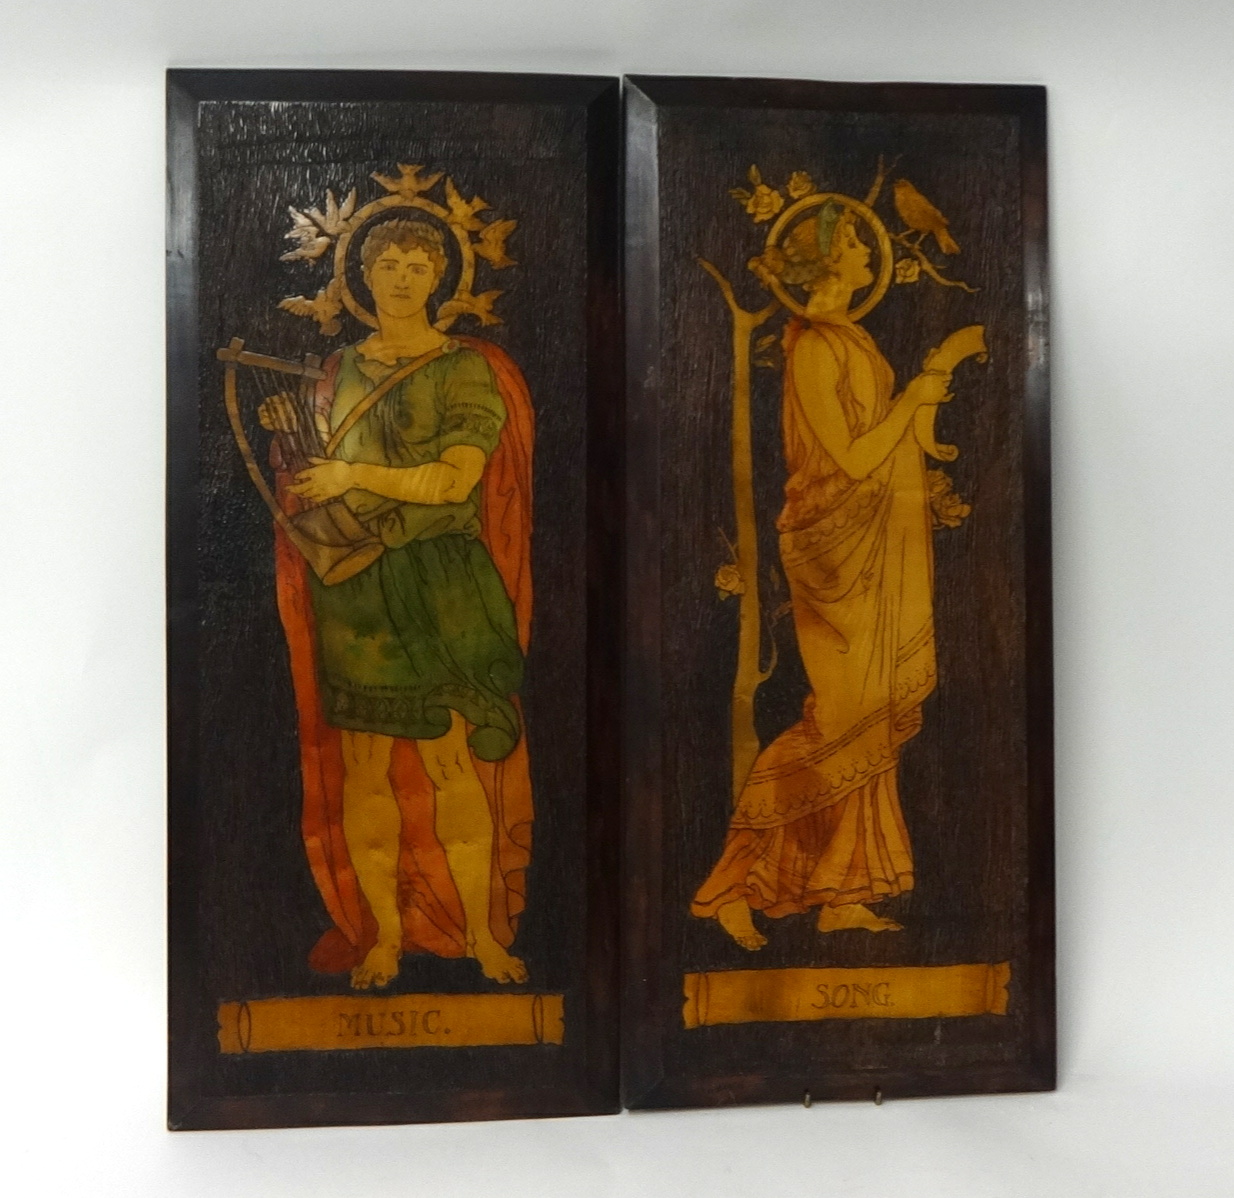 Pair of Art Nouveau wood panels with inlaid decoration titled 'Music' and 'Song', 78cm x 33cm